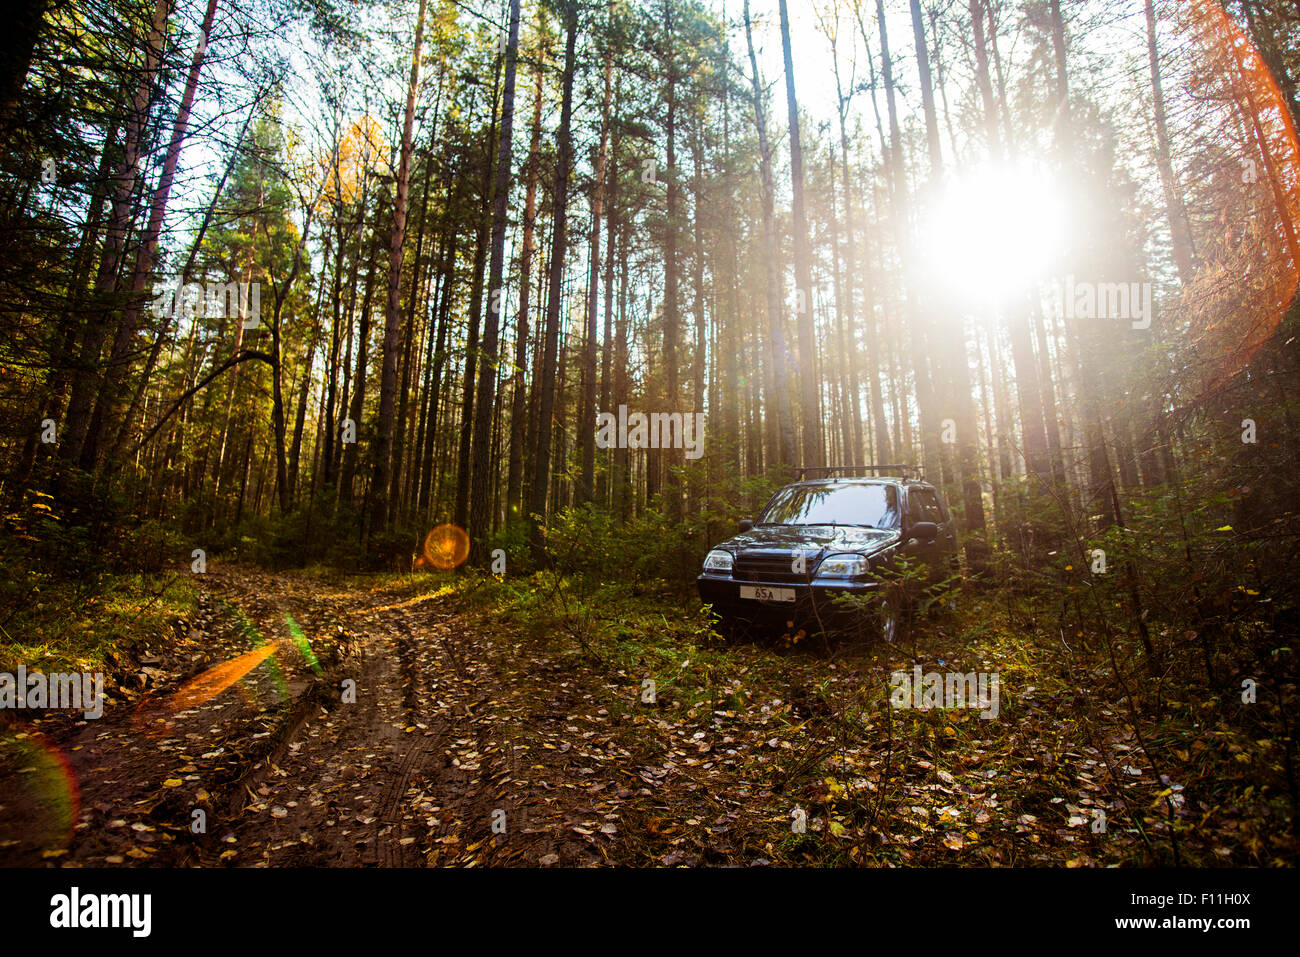 Sports utility vehicle in remote forest Stock Photo